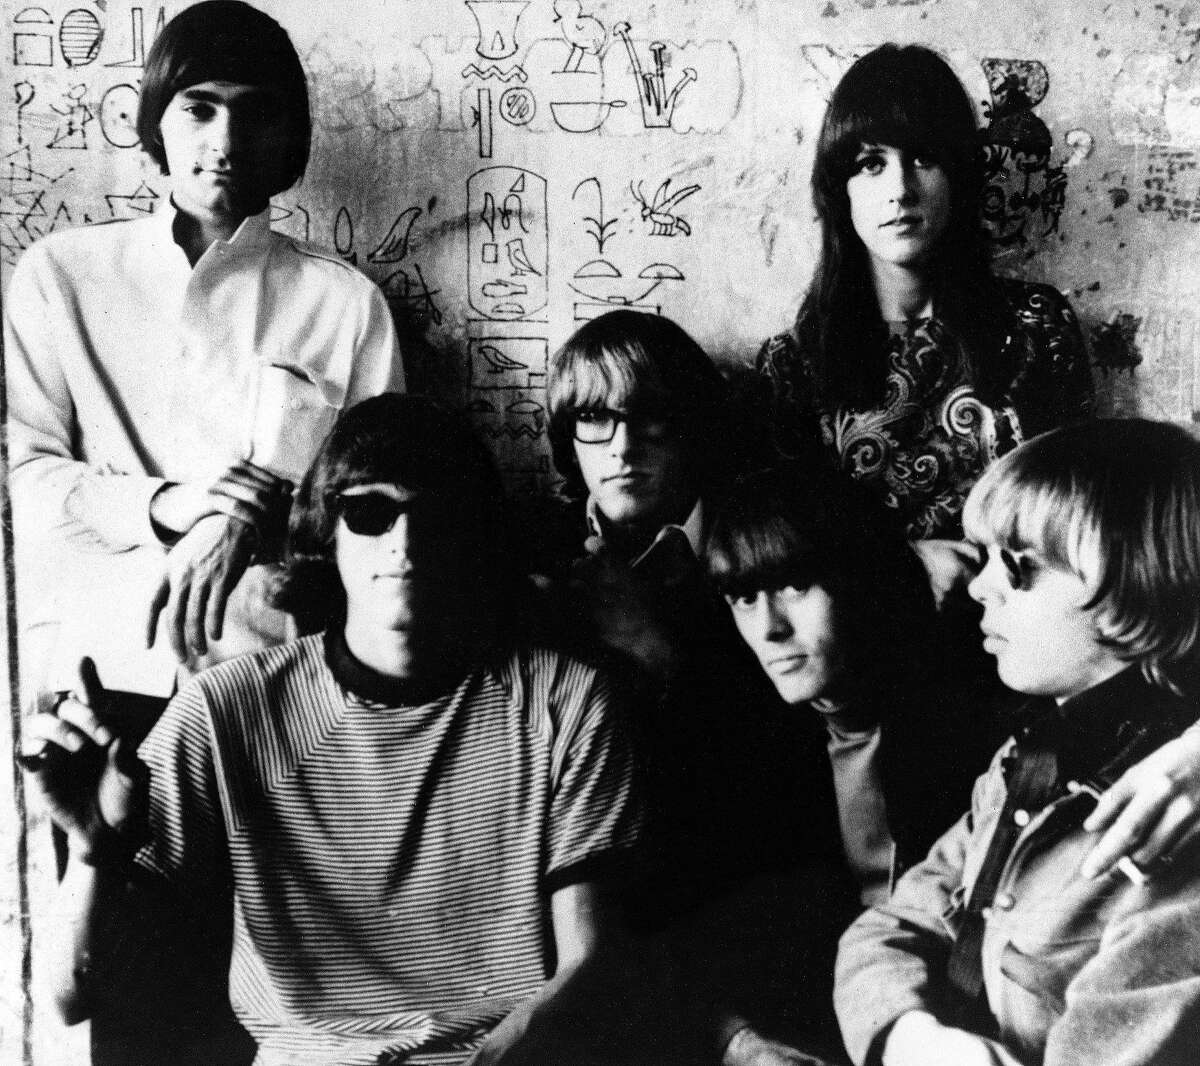 Jefferson Airplane impressed Chronicle critic early on